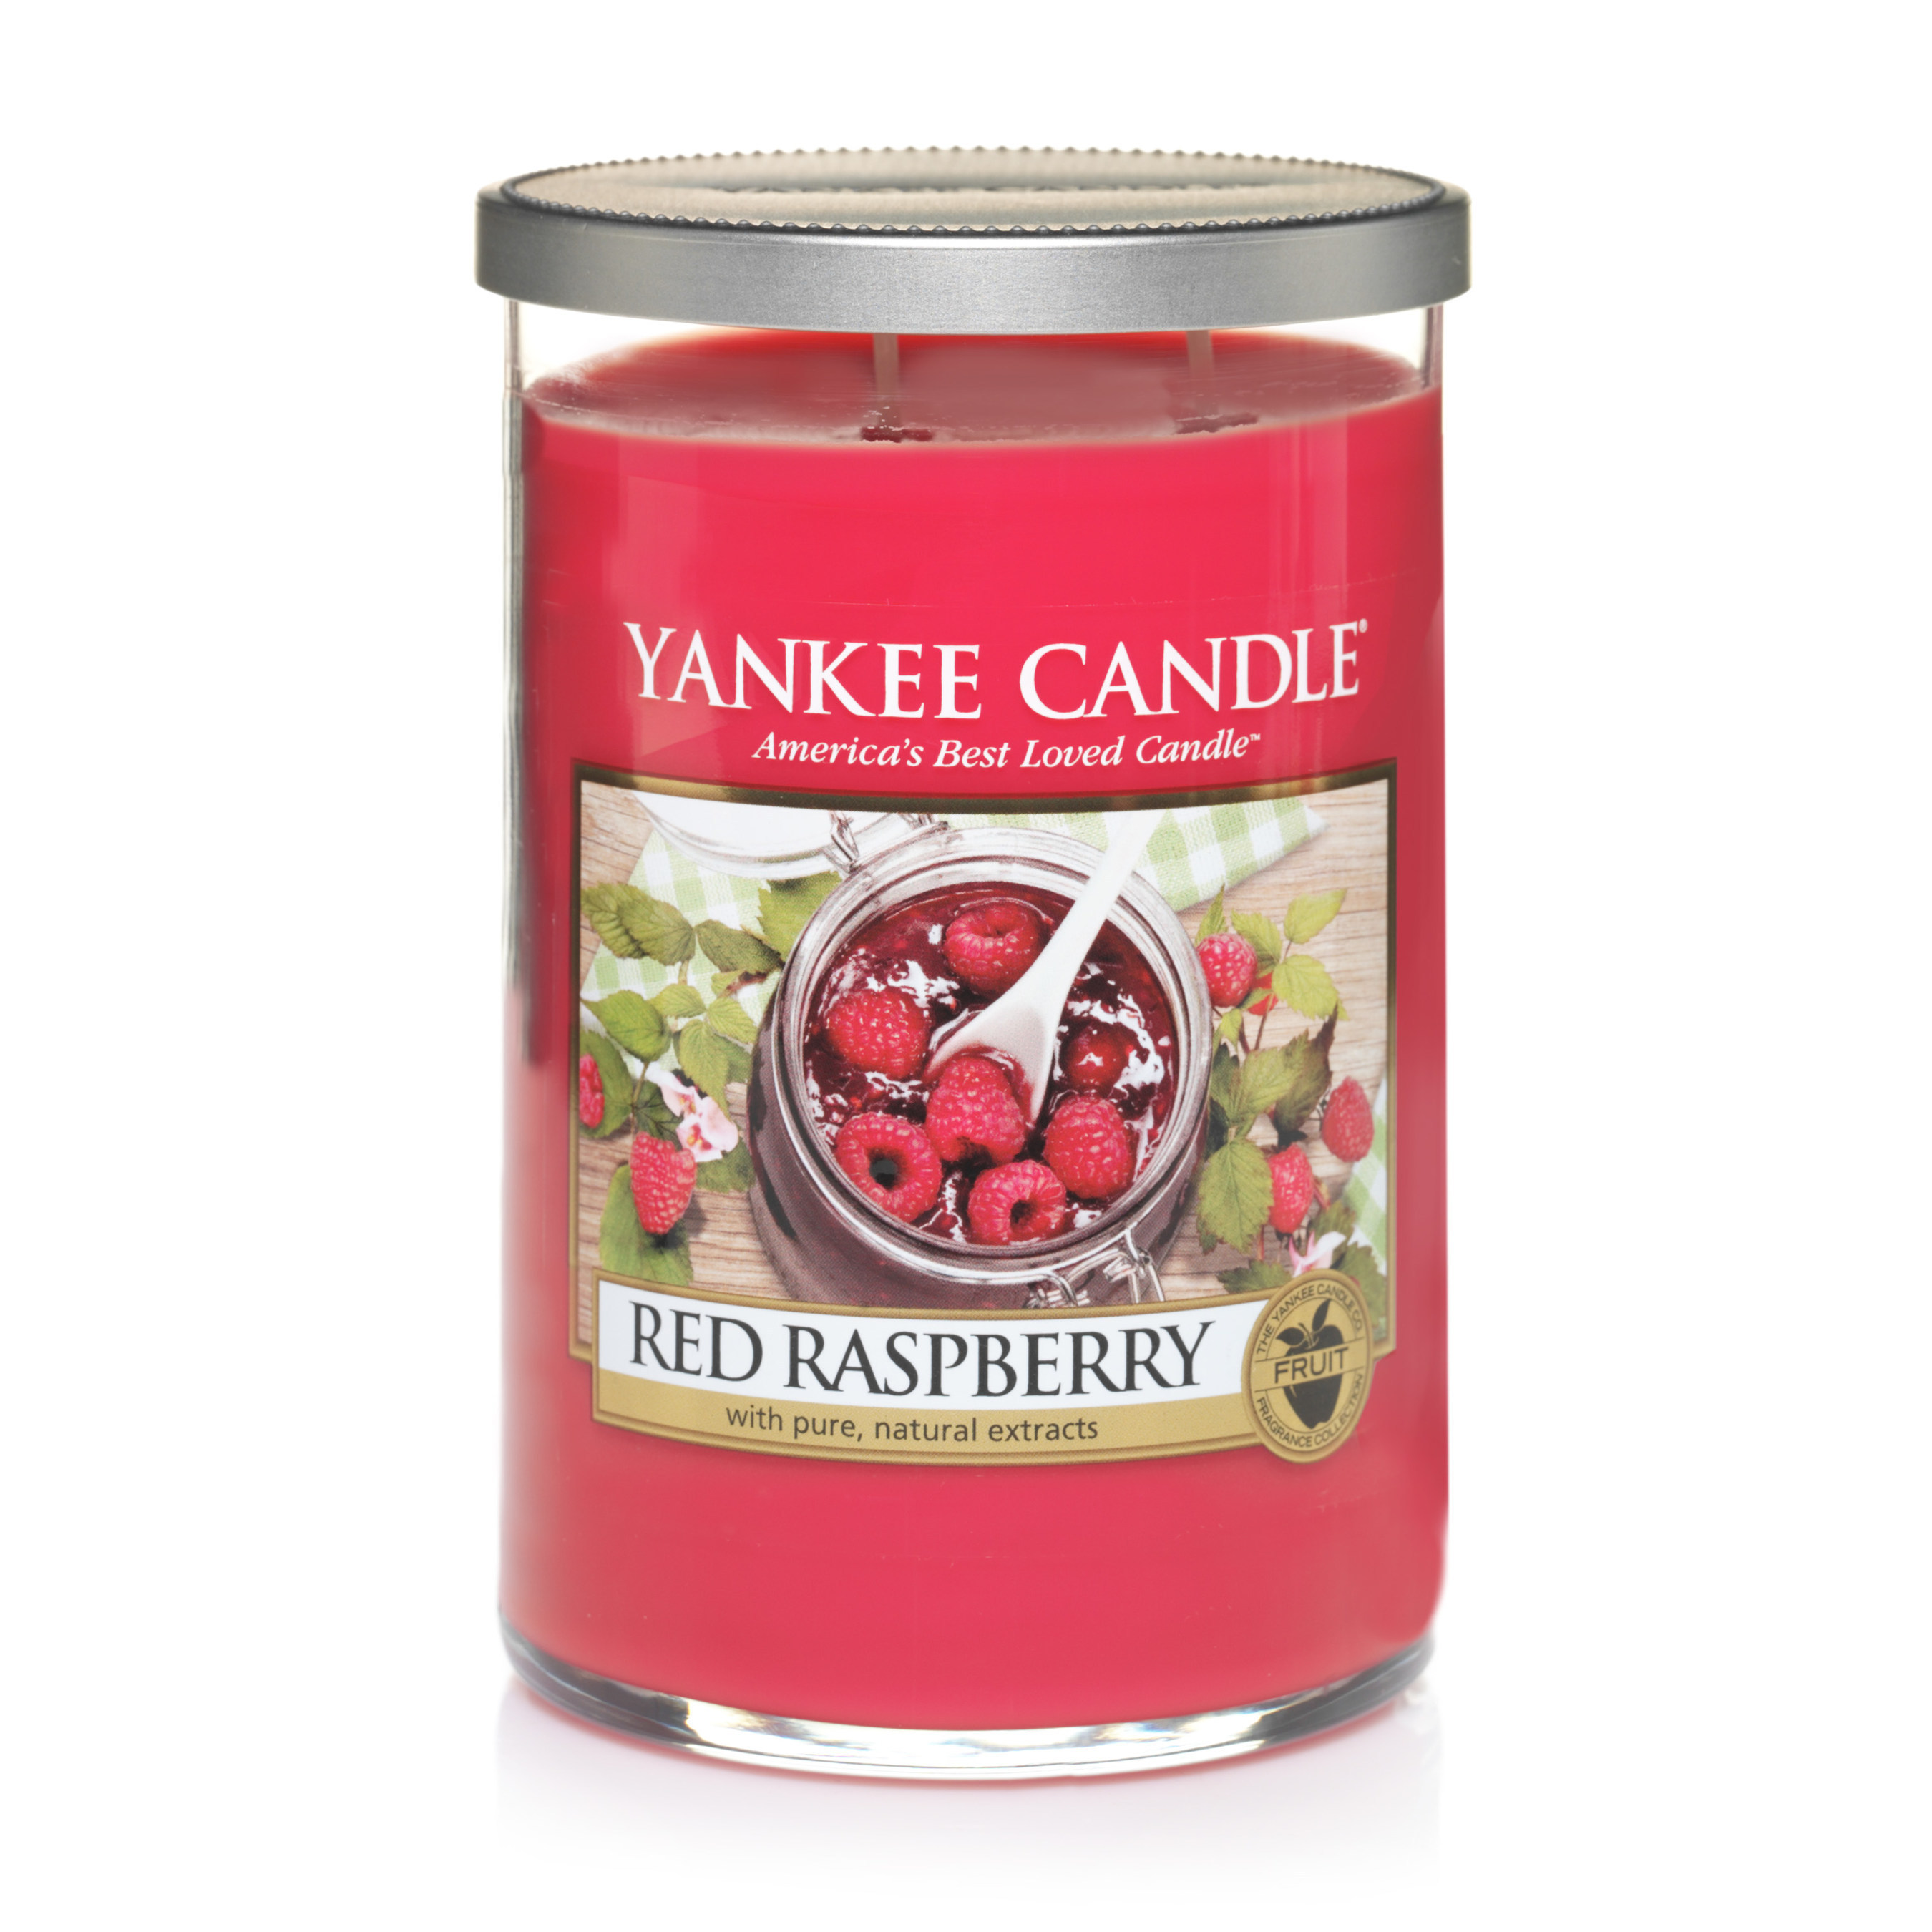 Tangy sweet and full of nature's goodness, Red Raspberry is one of five new fragrances in Yankee Candle's spring 2015 classic jar line.